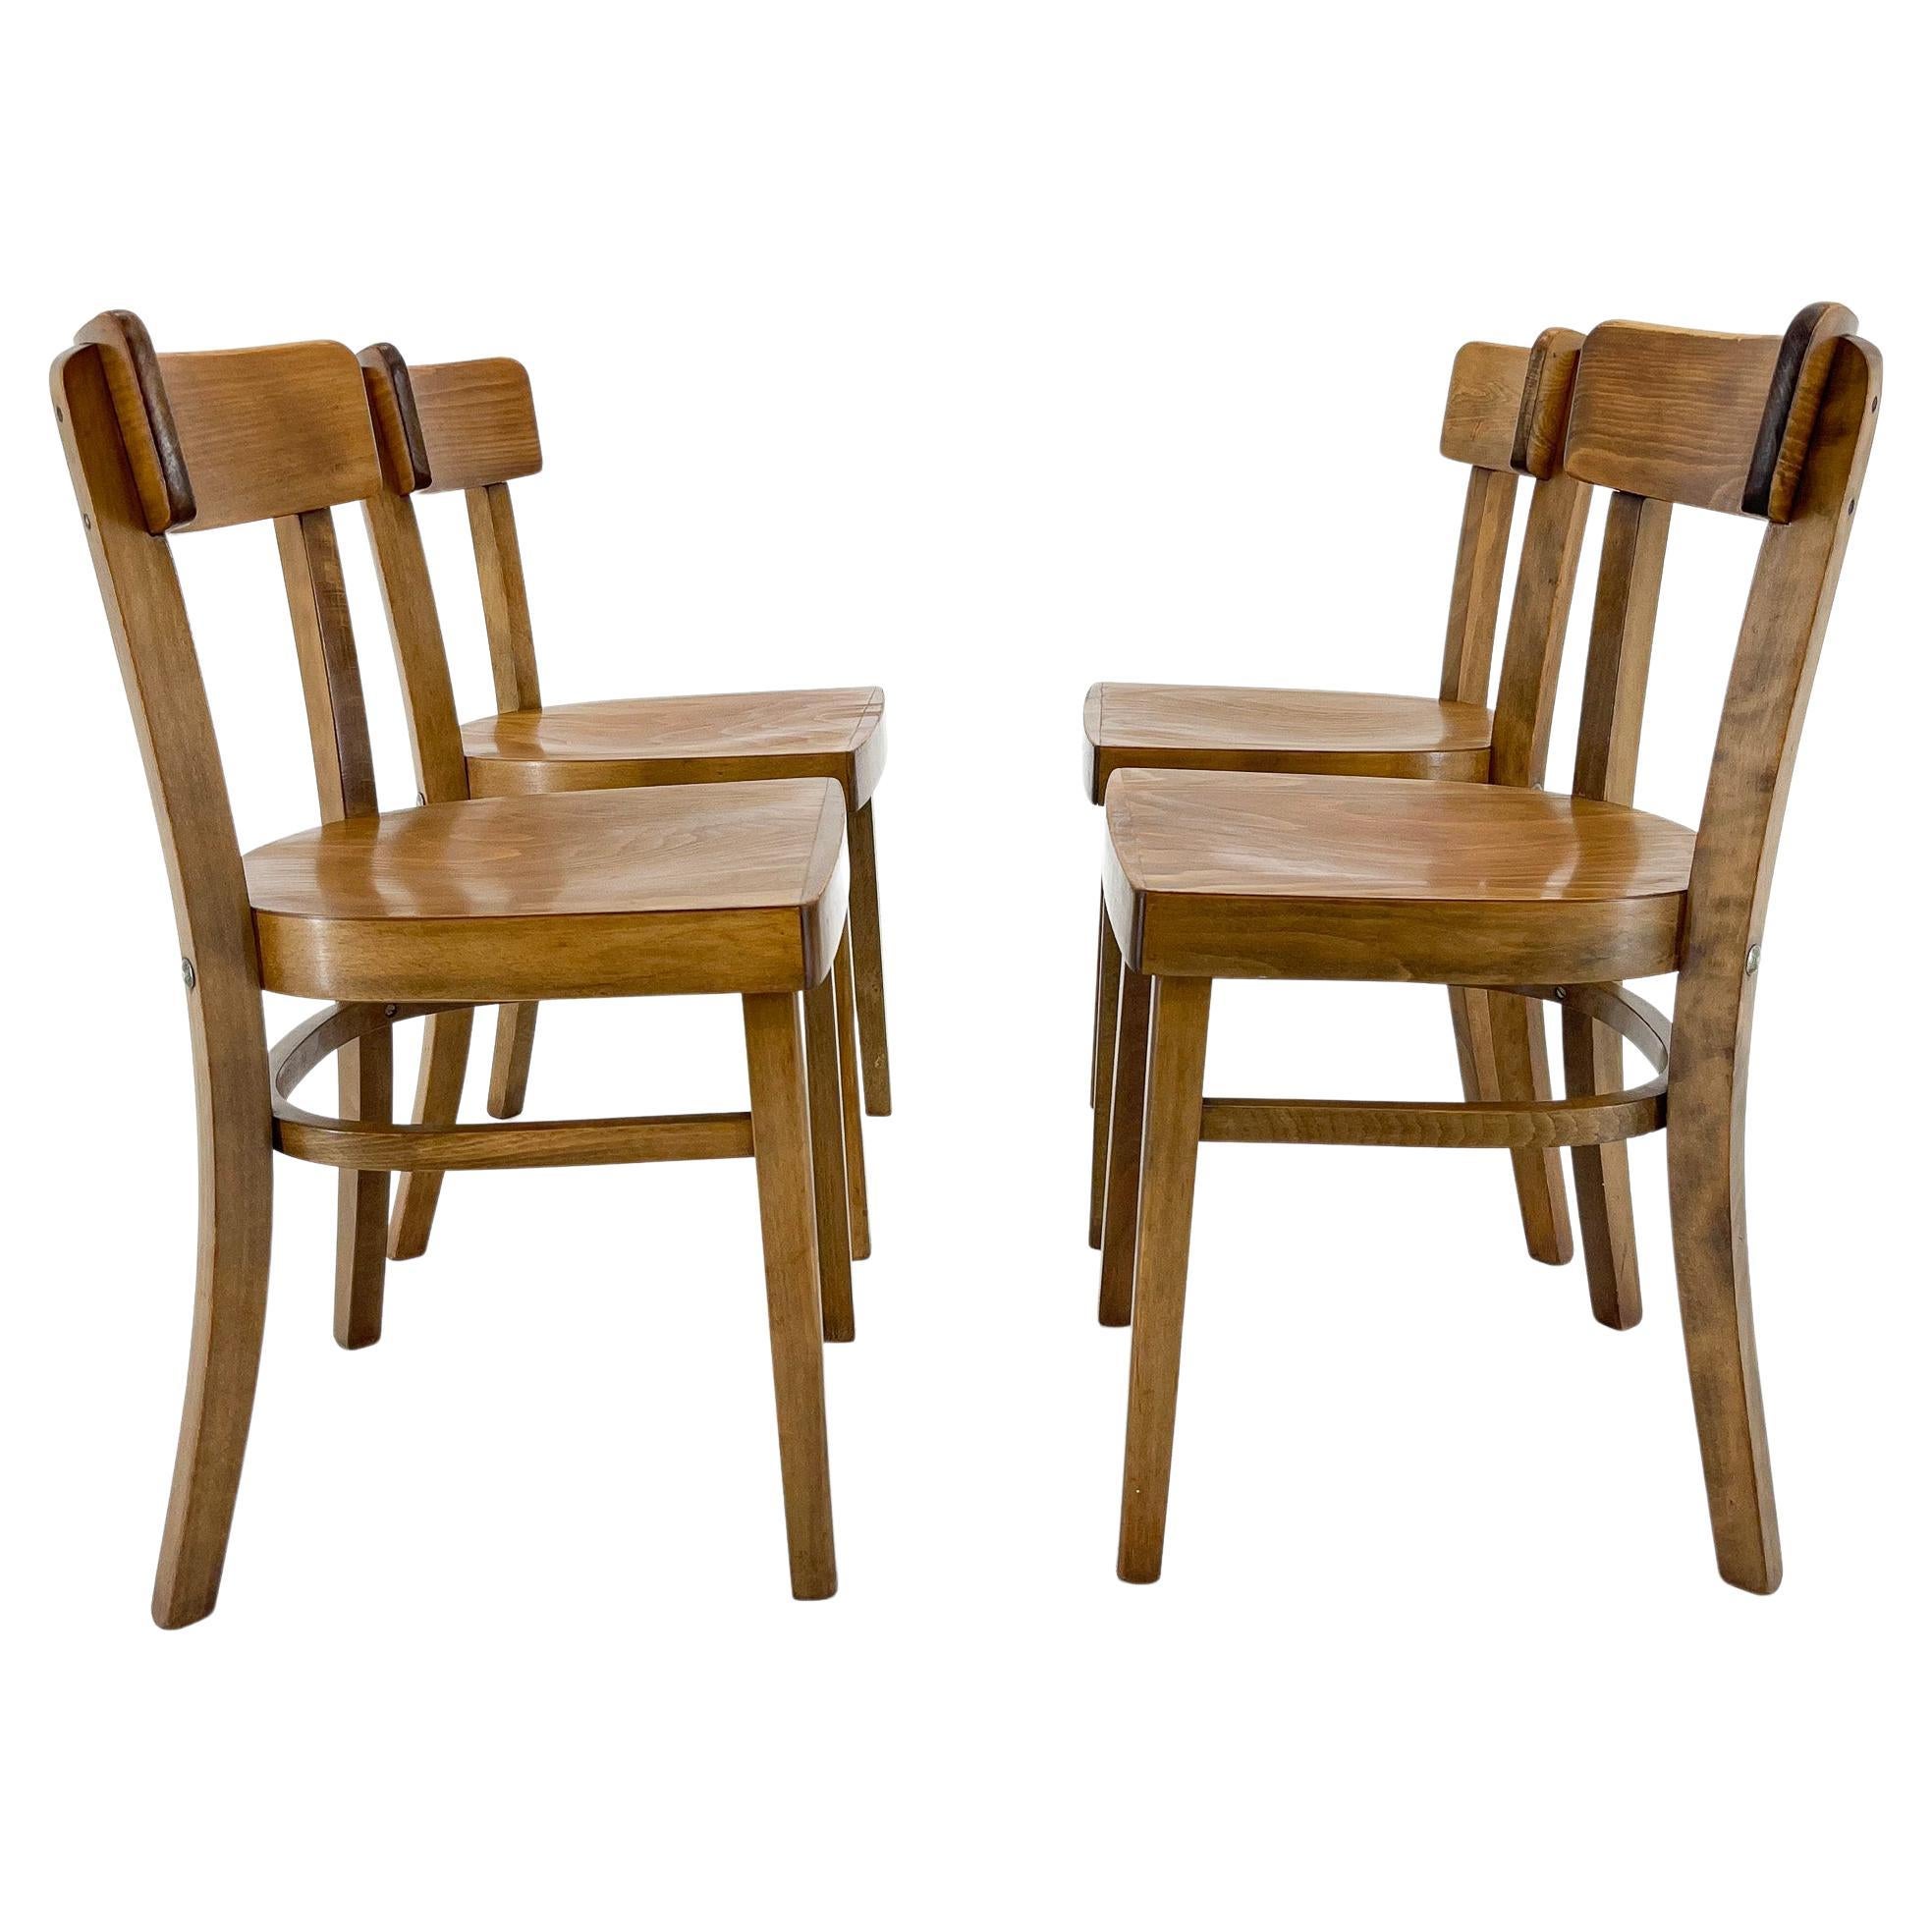 Set of Four Wooden Ton Chairs, Czechoslovakia, 1960s